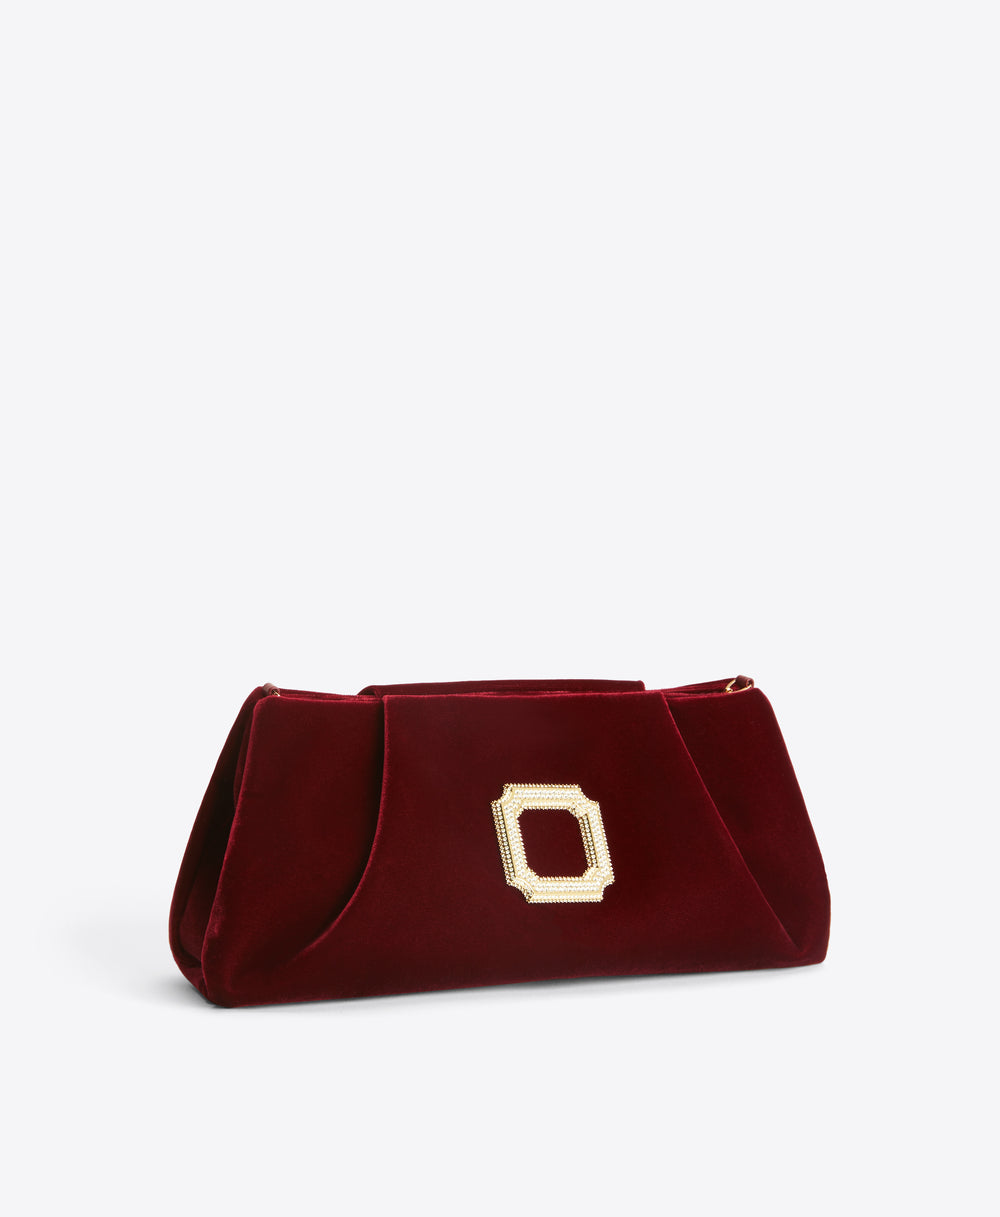 Vittoria Red Velvet Clutch Bag with Buckle Malone Souliers